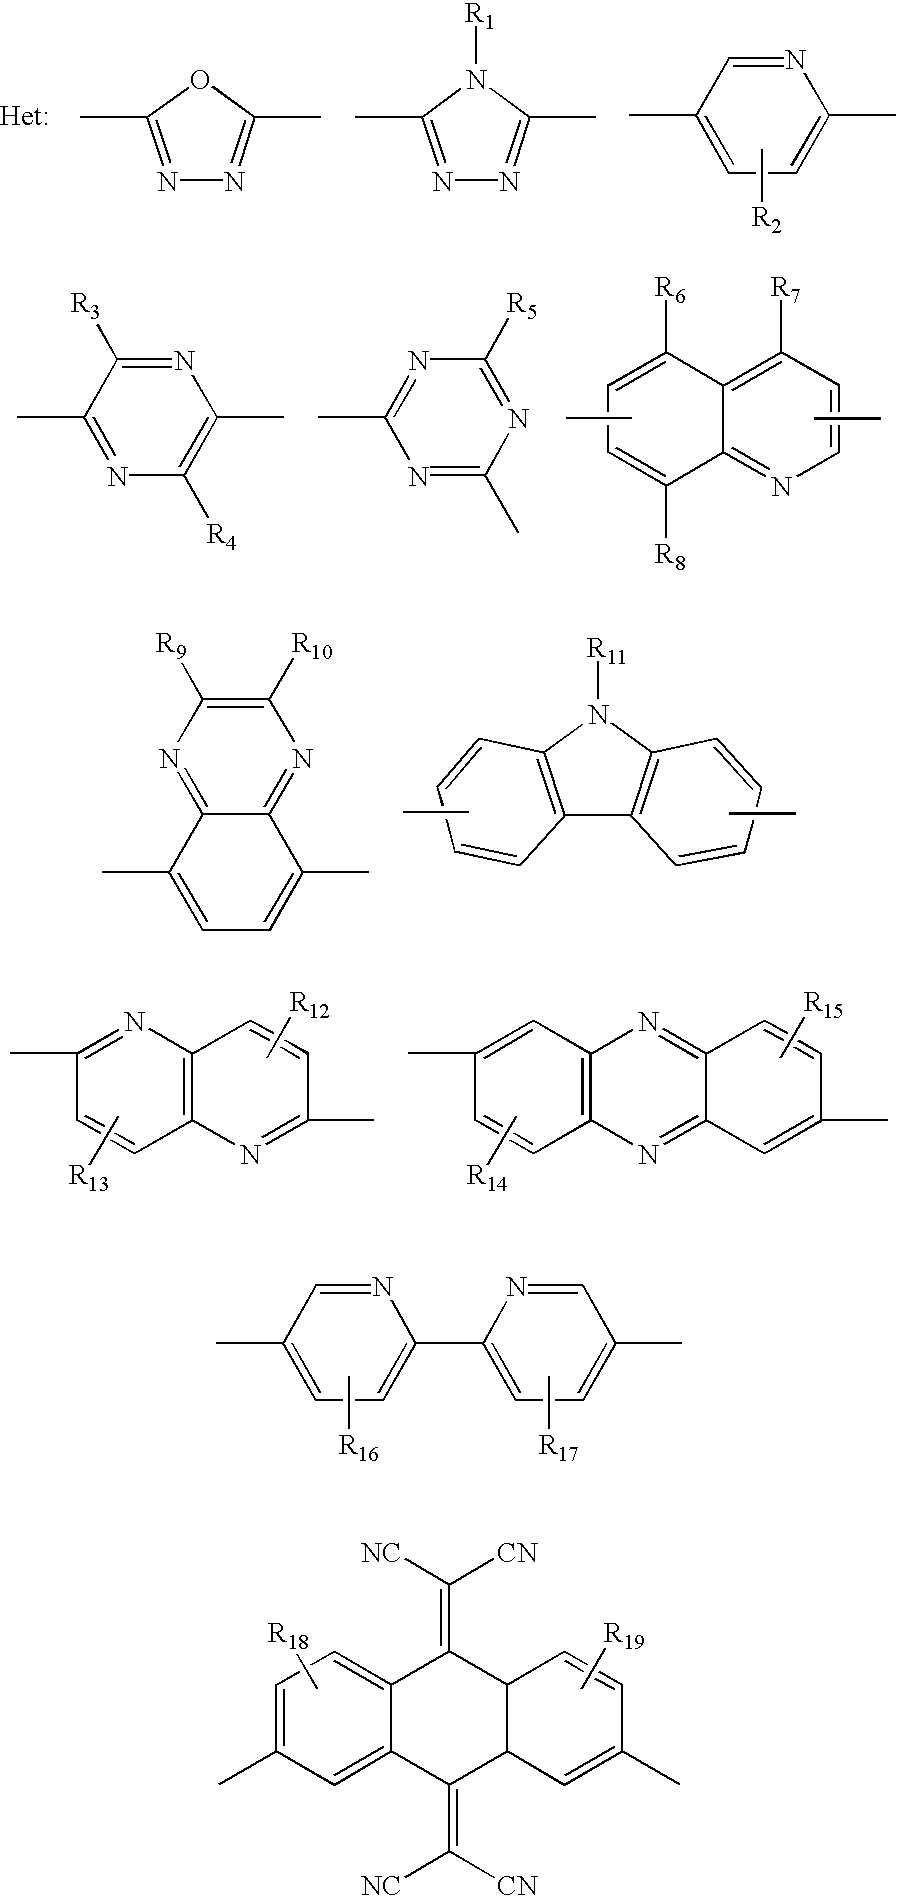 Polymers for use in optical devices